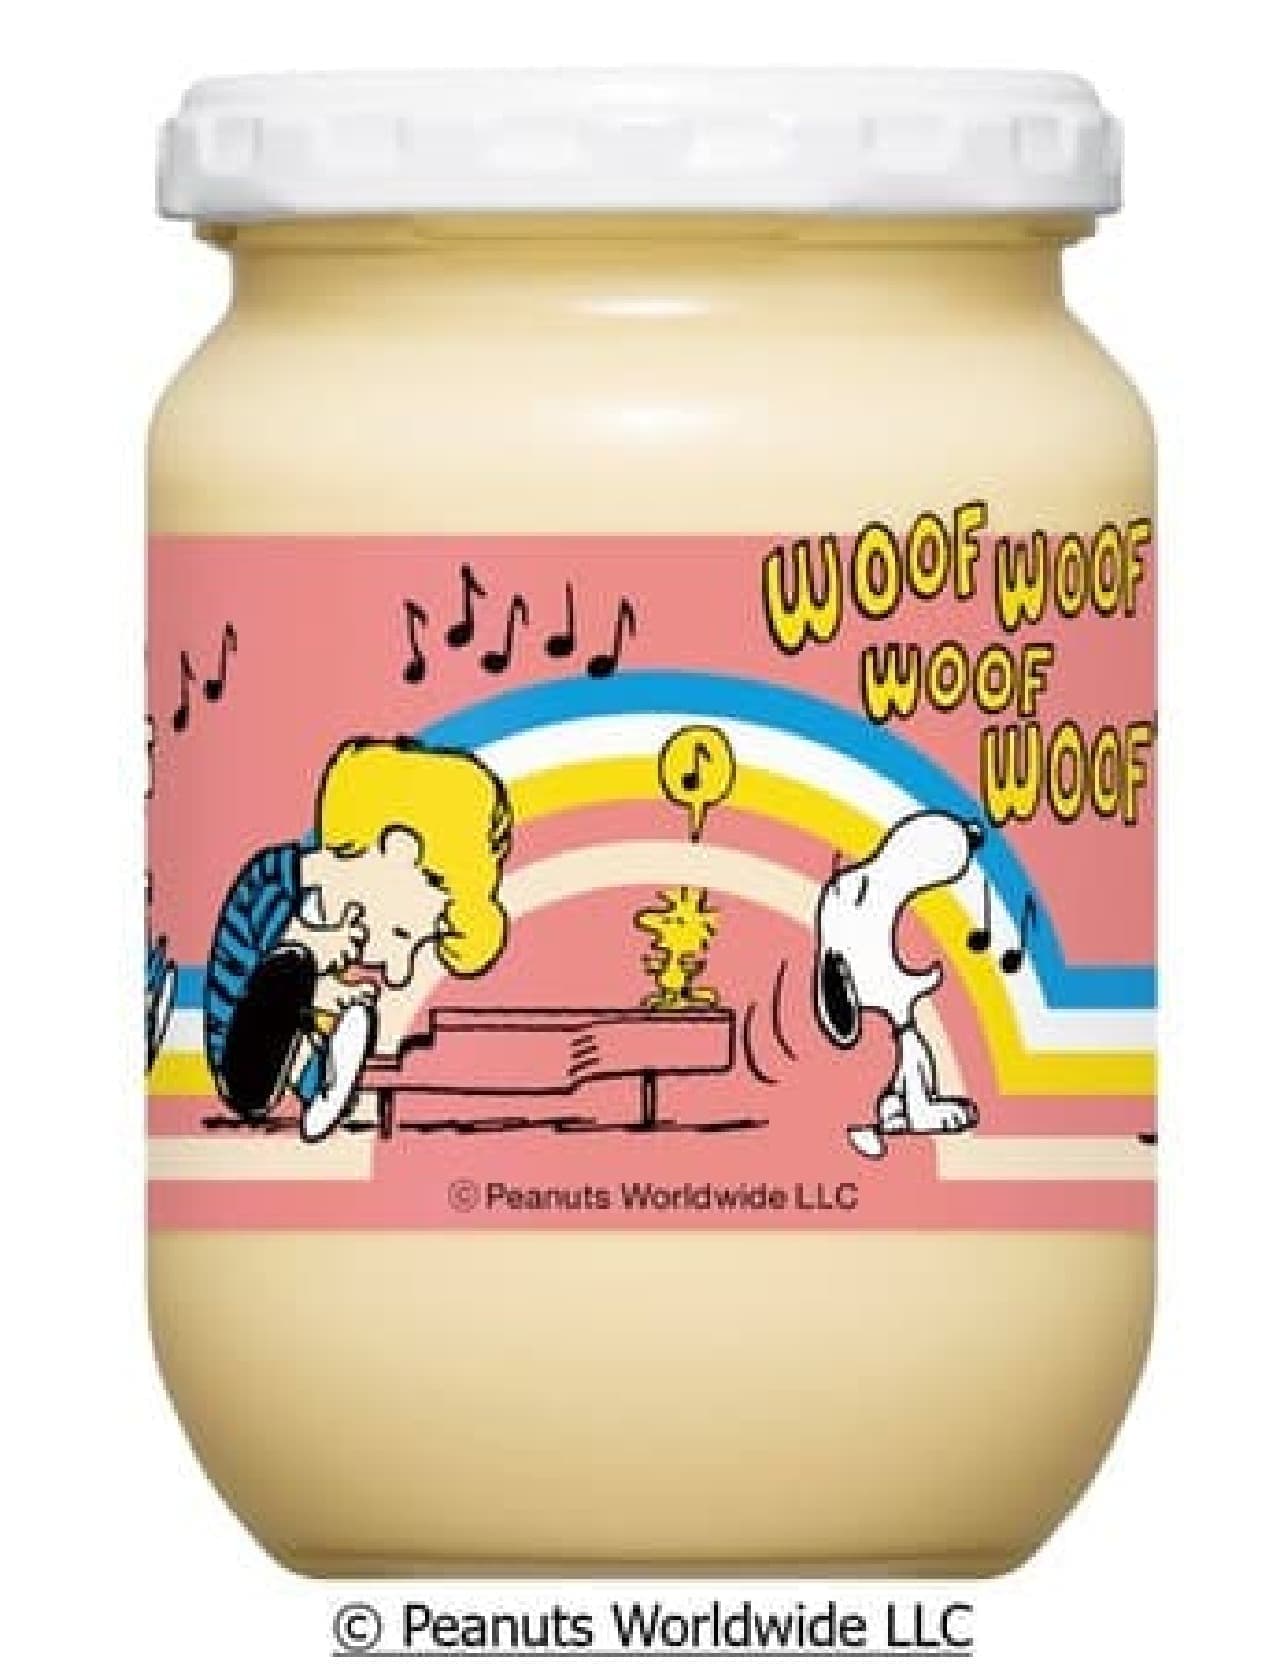  New "Kewpie Mayonnaise Snoopy (Bottle)" Design -- Two Types: Spring/Summer and Autumn/Winter! Cute illustrations to add color to your dining table